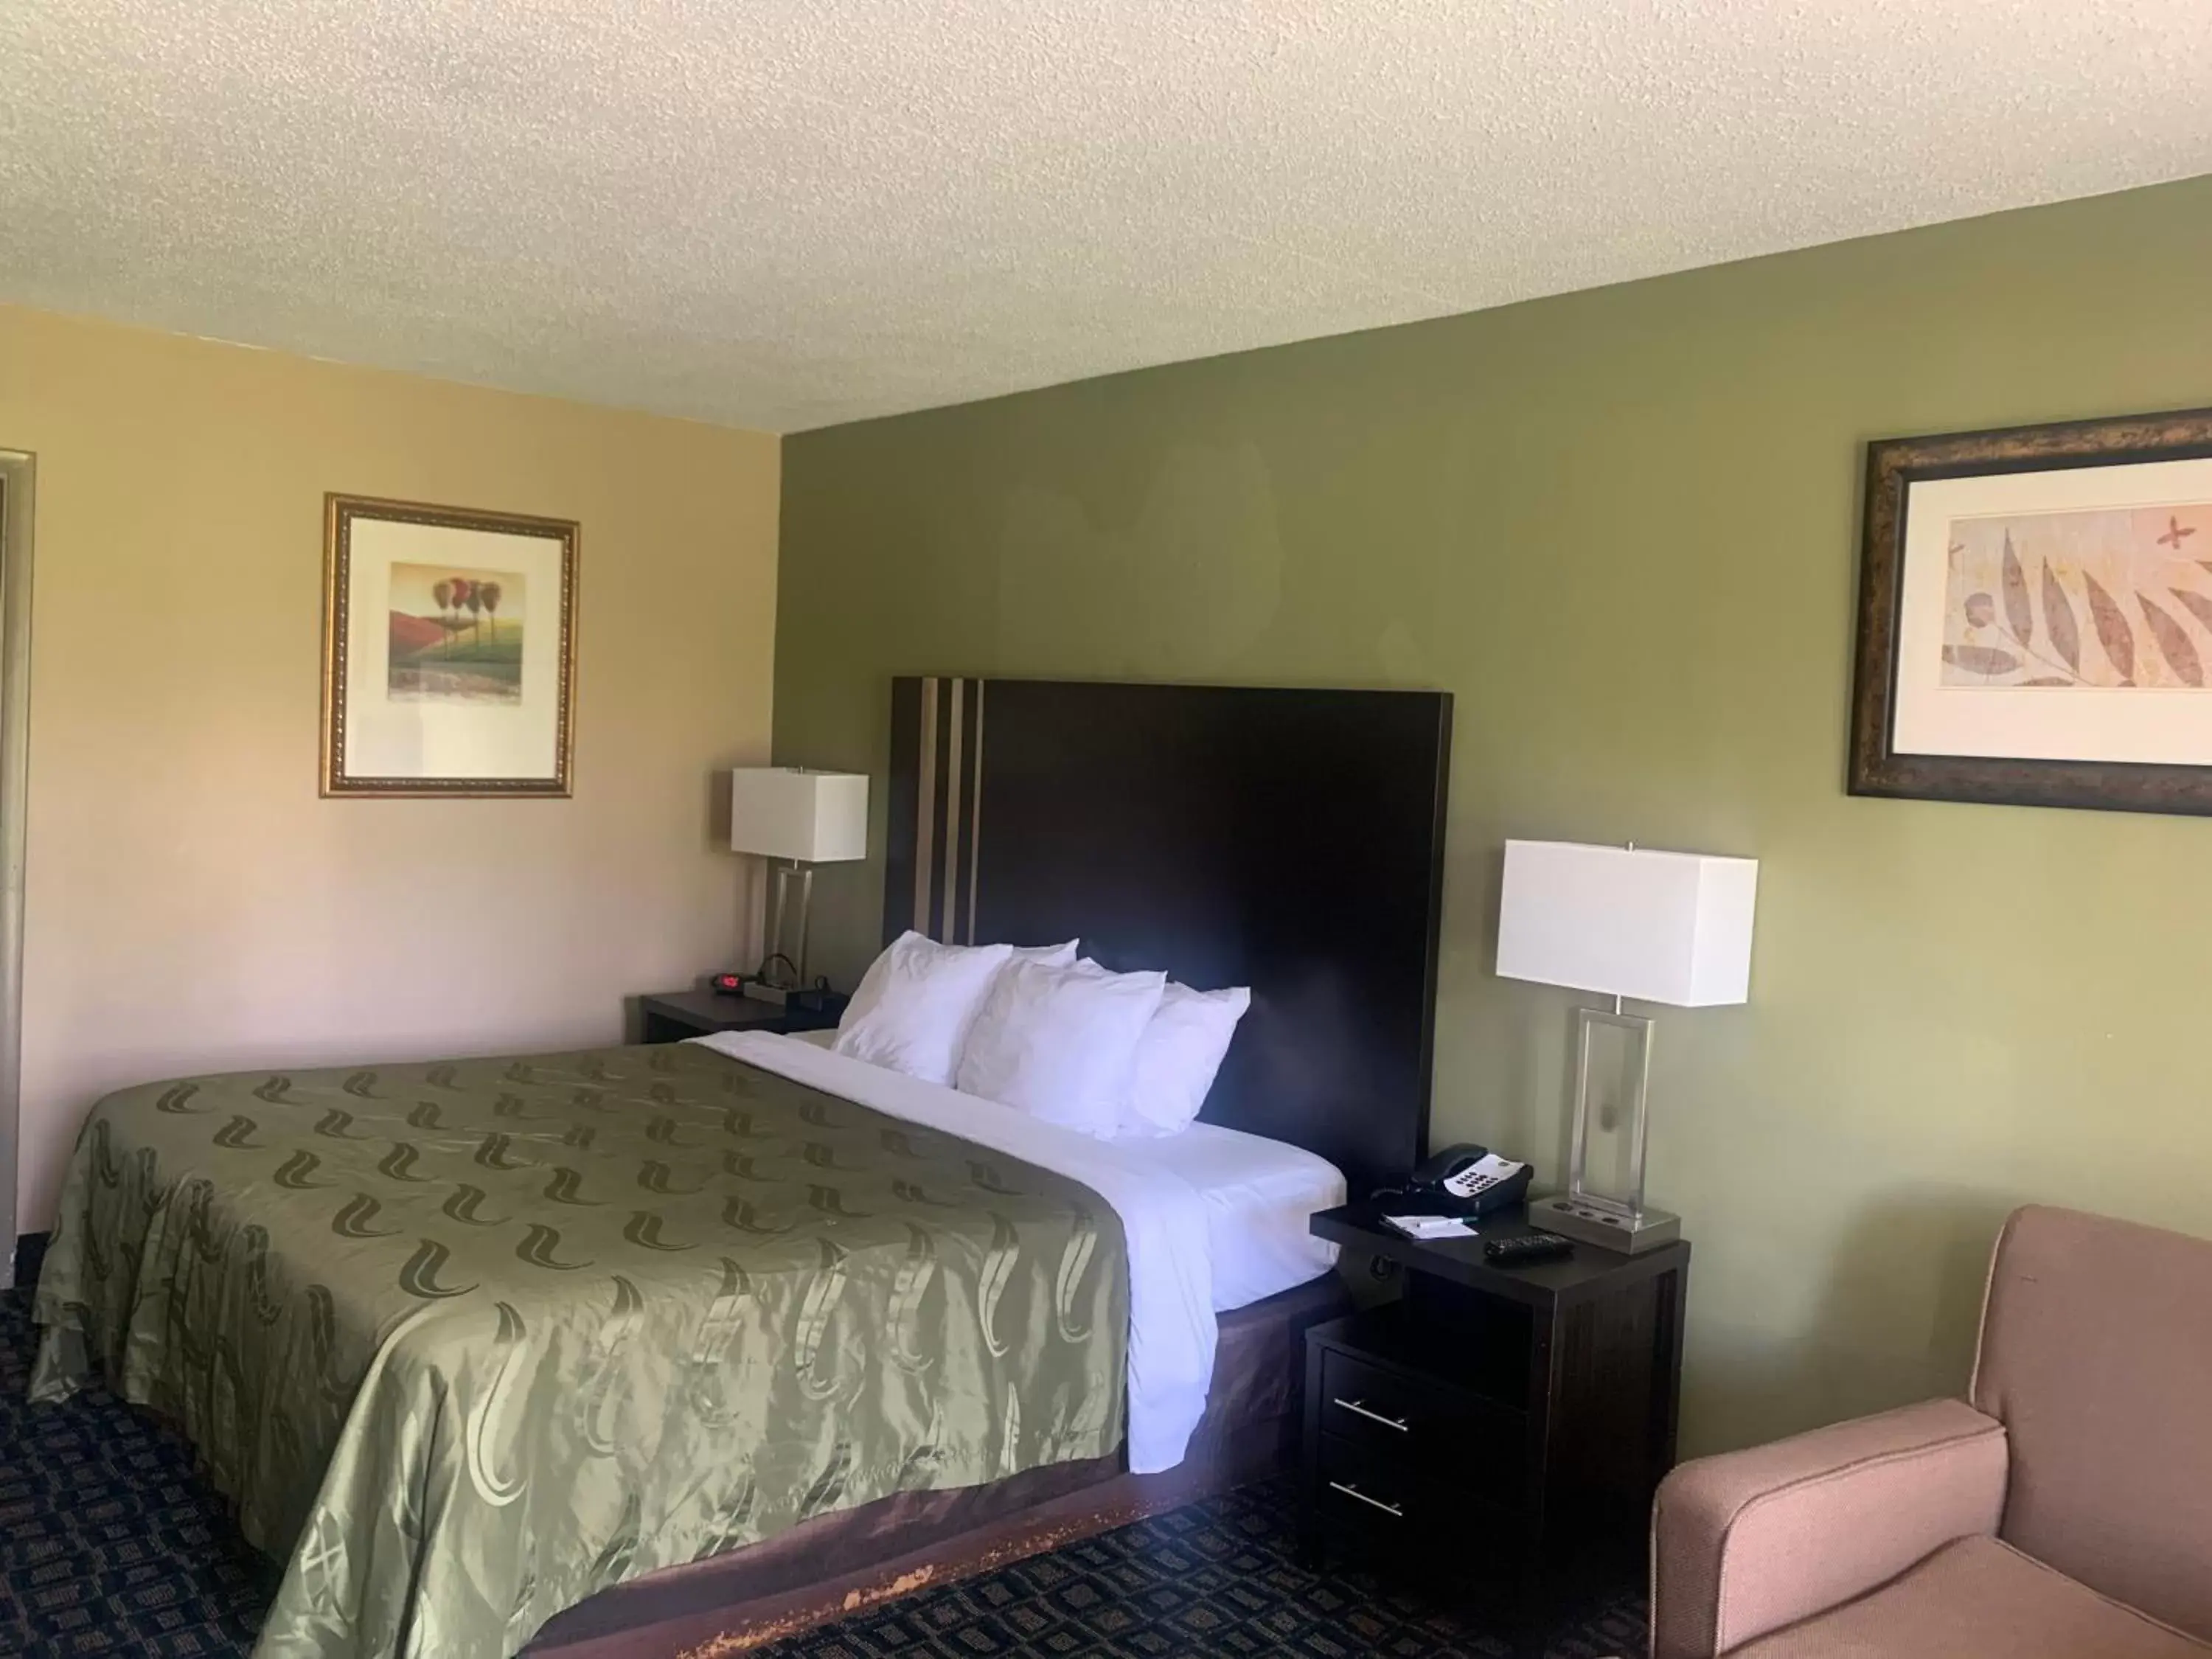 King Room - Non-Smoking (No Pets Allowed) in Quality Inn & Suites Brooksville I-75/Dade City